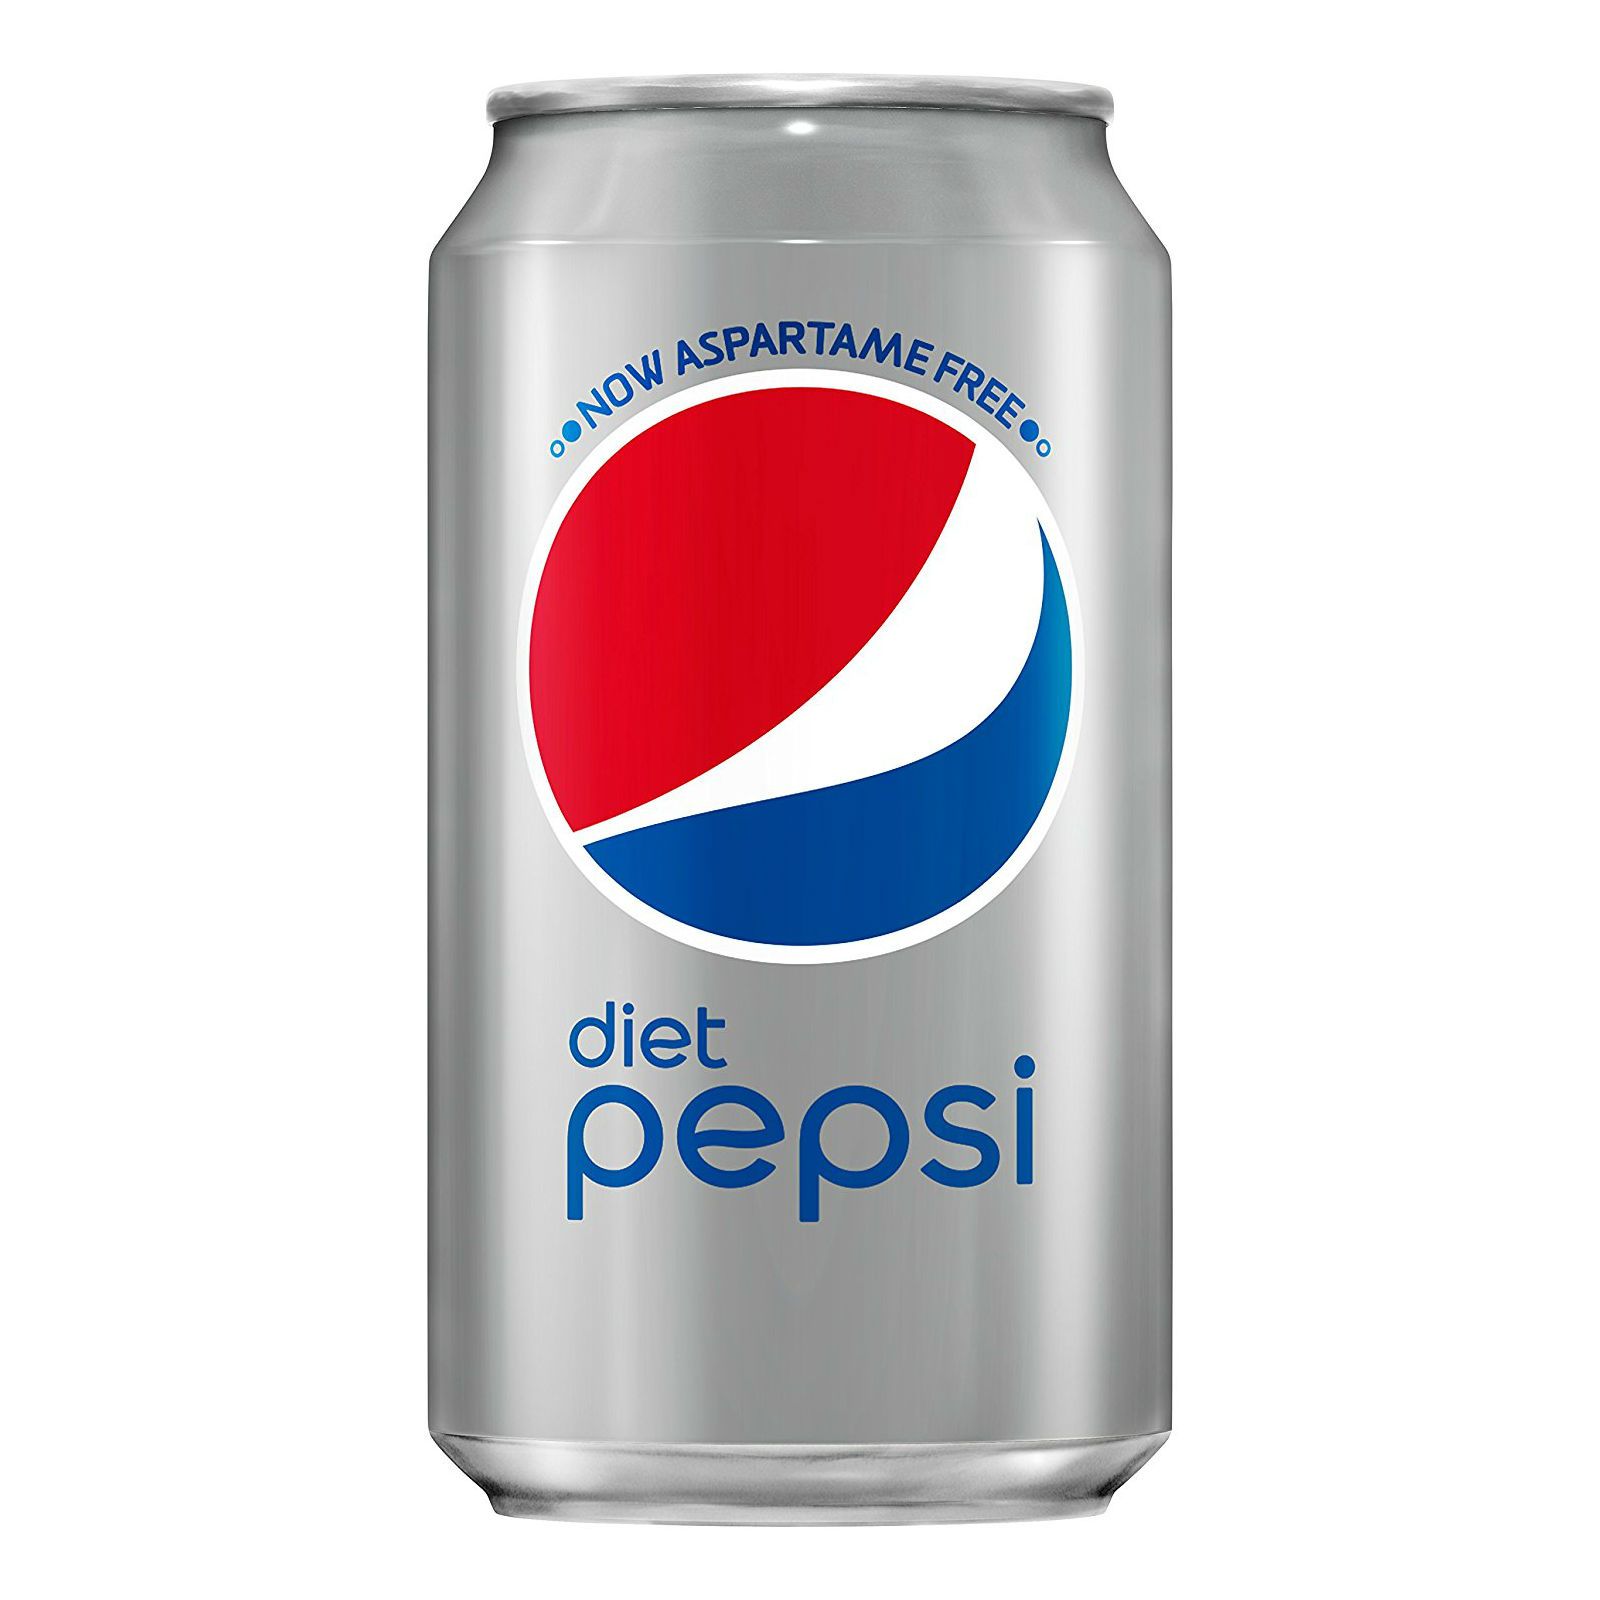 Pepsi Tries to Dodge ‘Diet’ Drinks Class Action Lawsuit - Top Class Actions